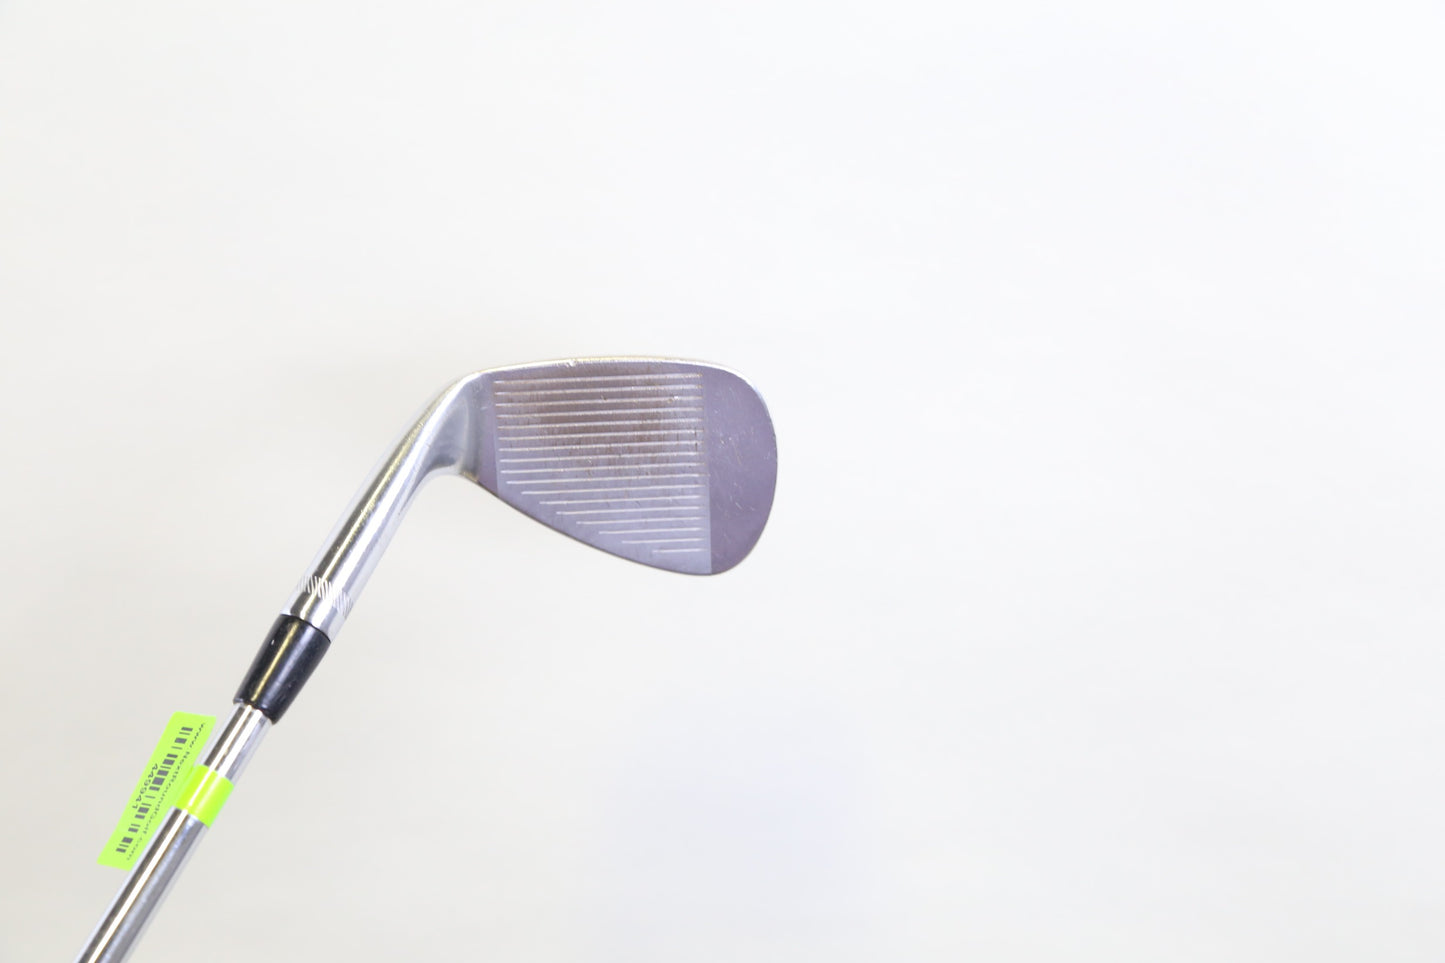 Used Titleist Vokey SM5 Tour Chrome S Grind Sand Wedge - Right-Handed - 54 Degrees - Stiff Flex